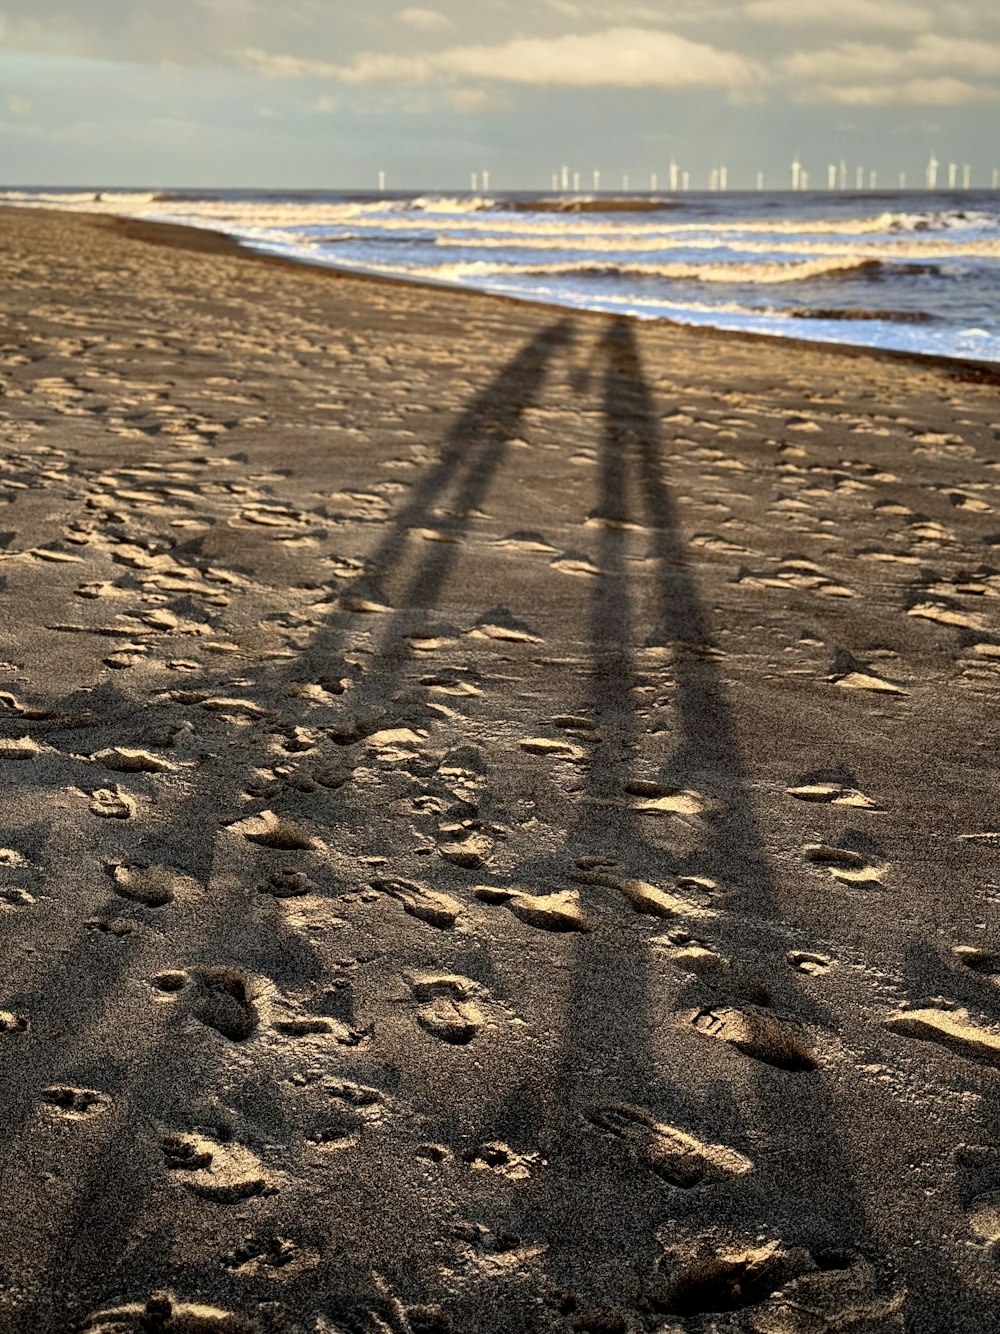 a shadow of a person standing on a beach